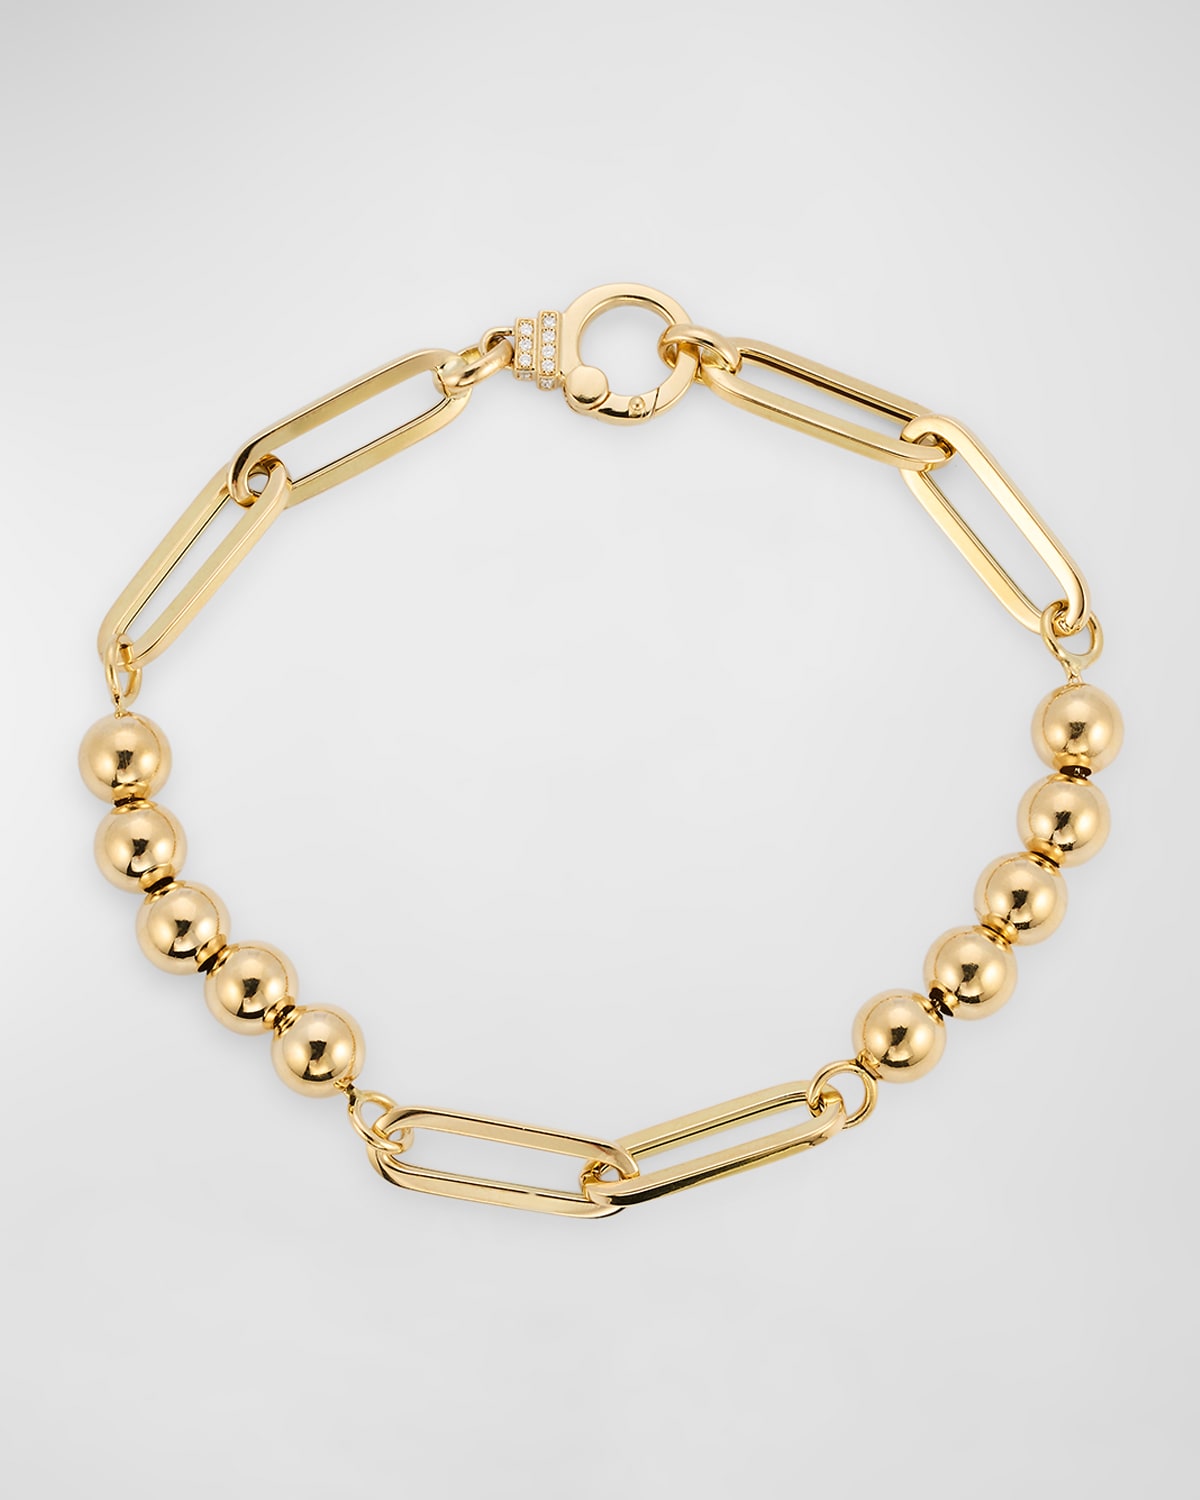 Sorellina 18k Yellow Gold Beads And Oval Link Bracelet With Gh-si Diamonds